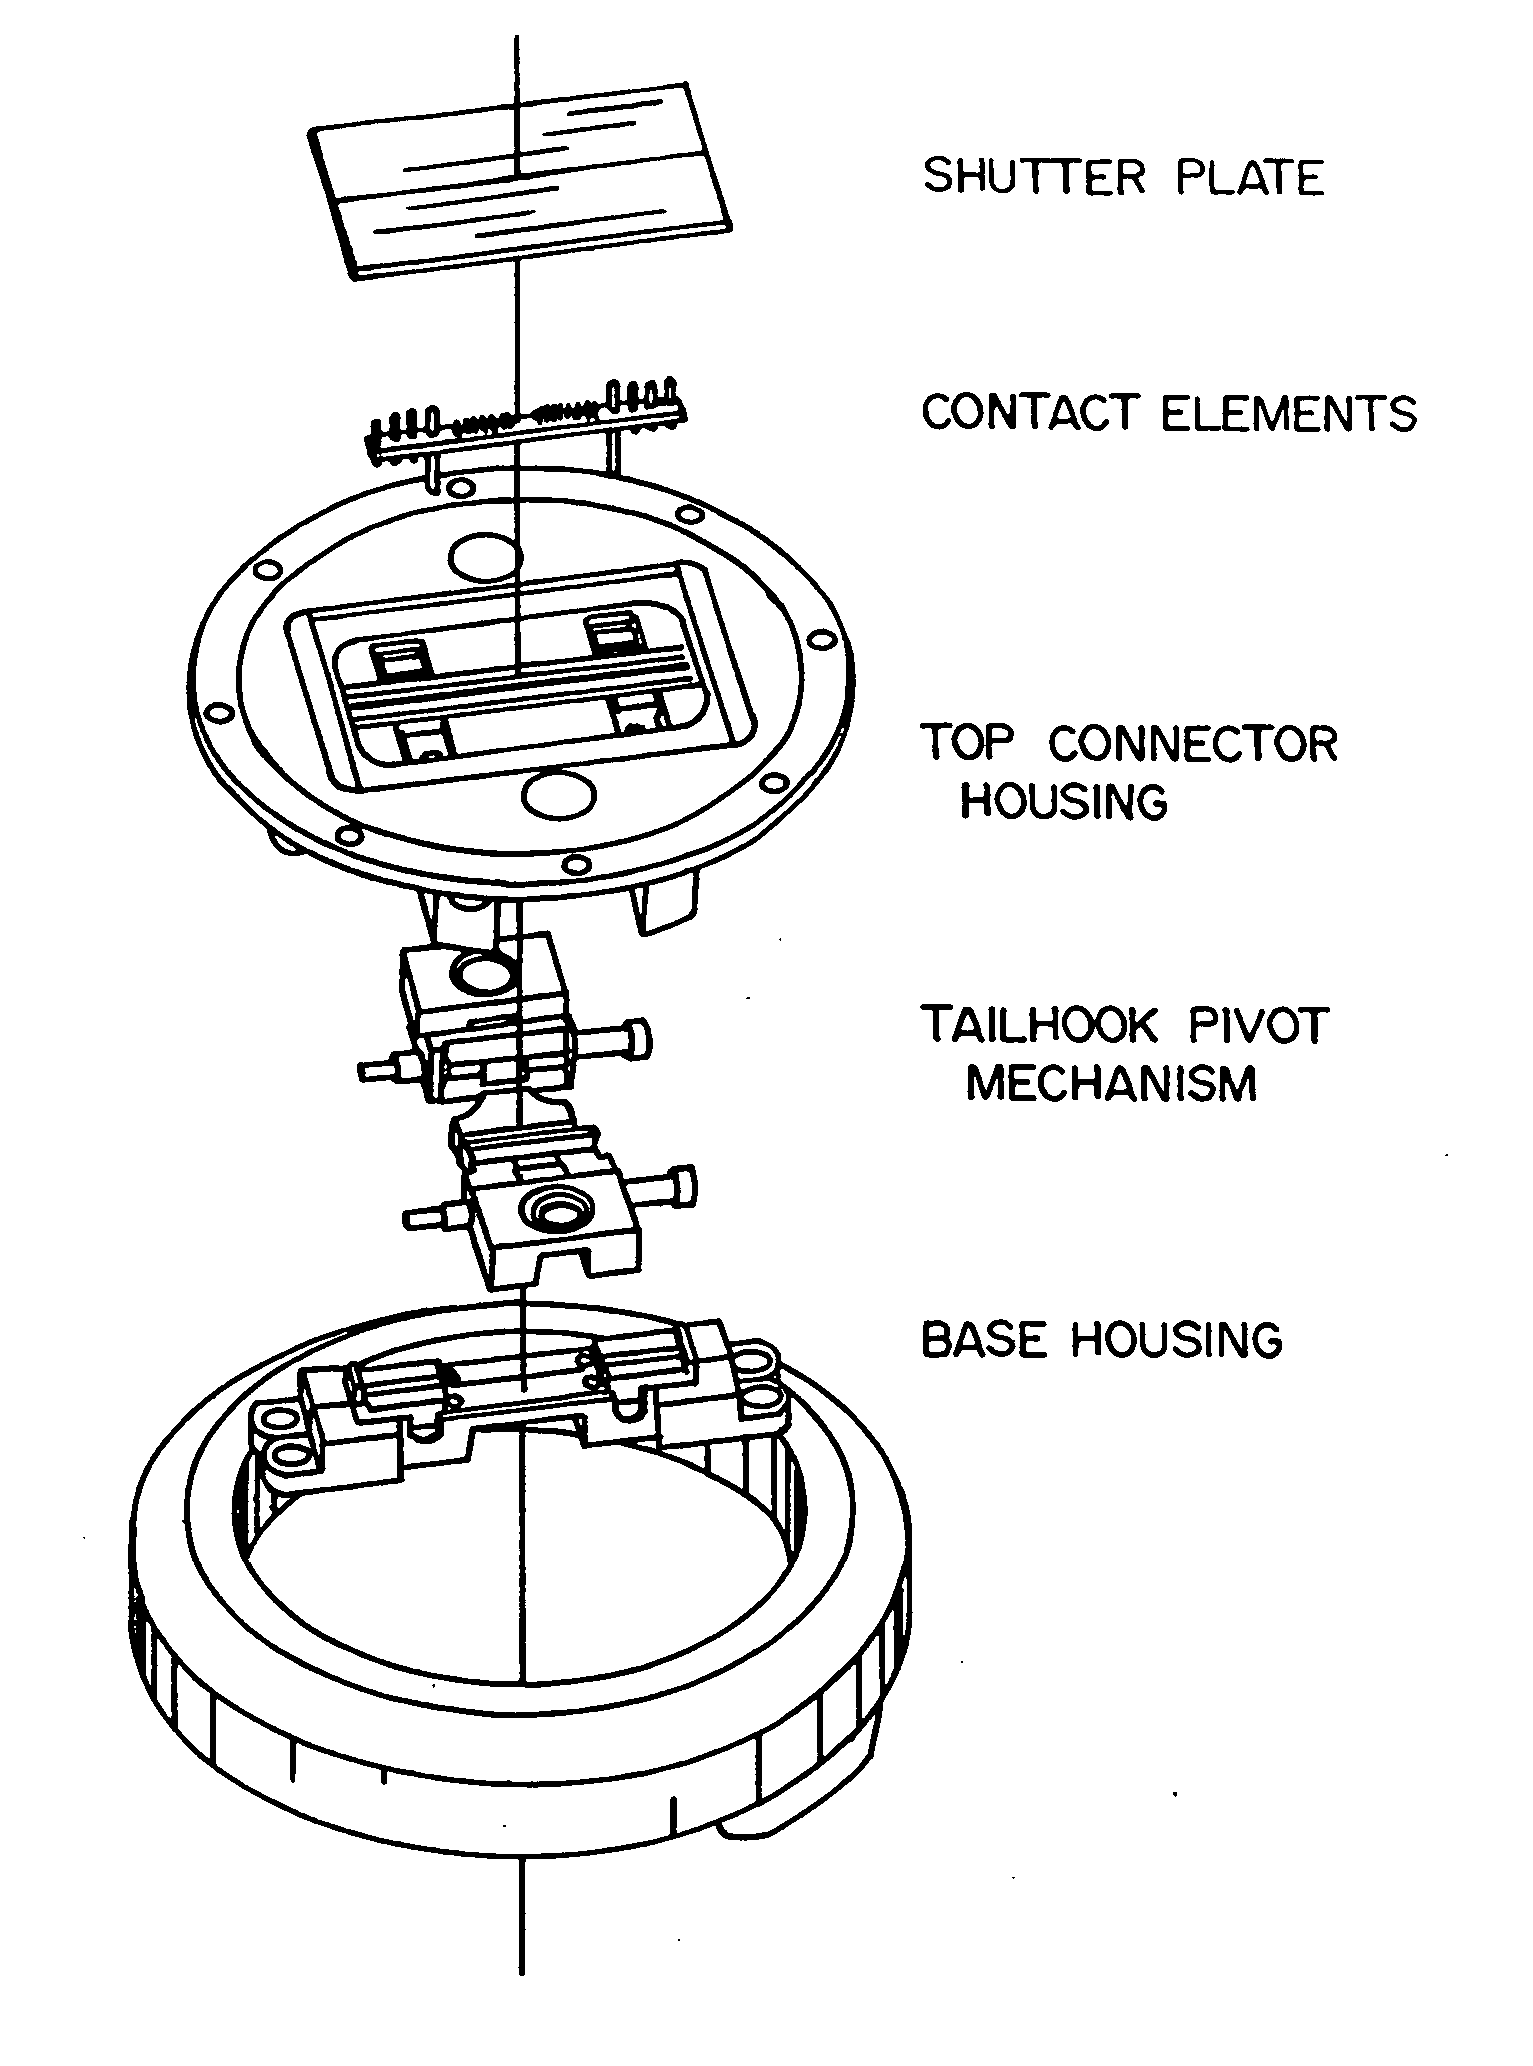 Connector for harsh environments